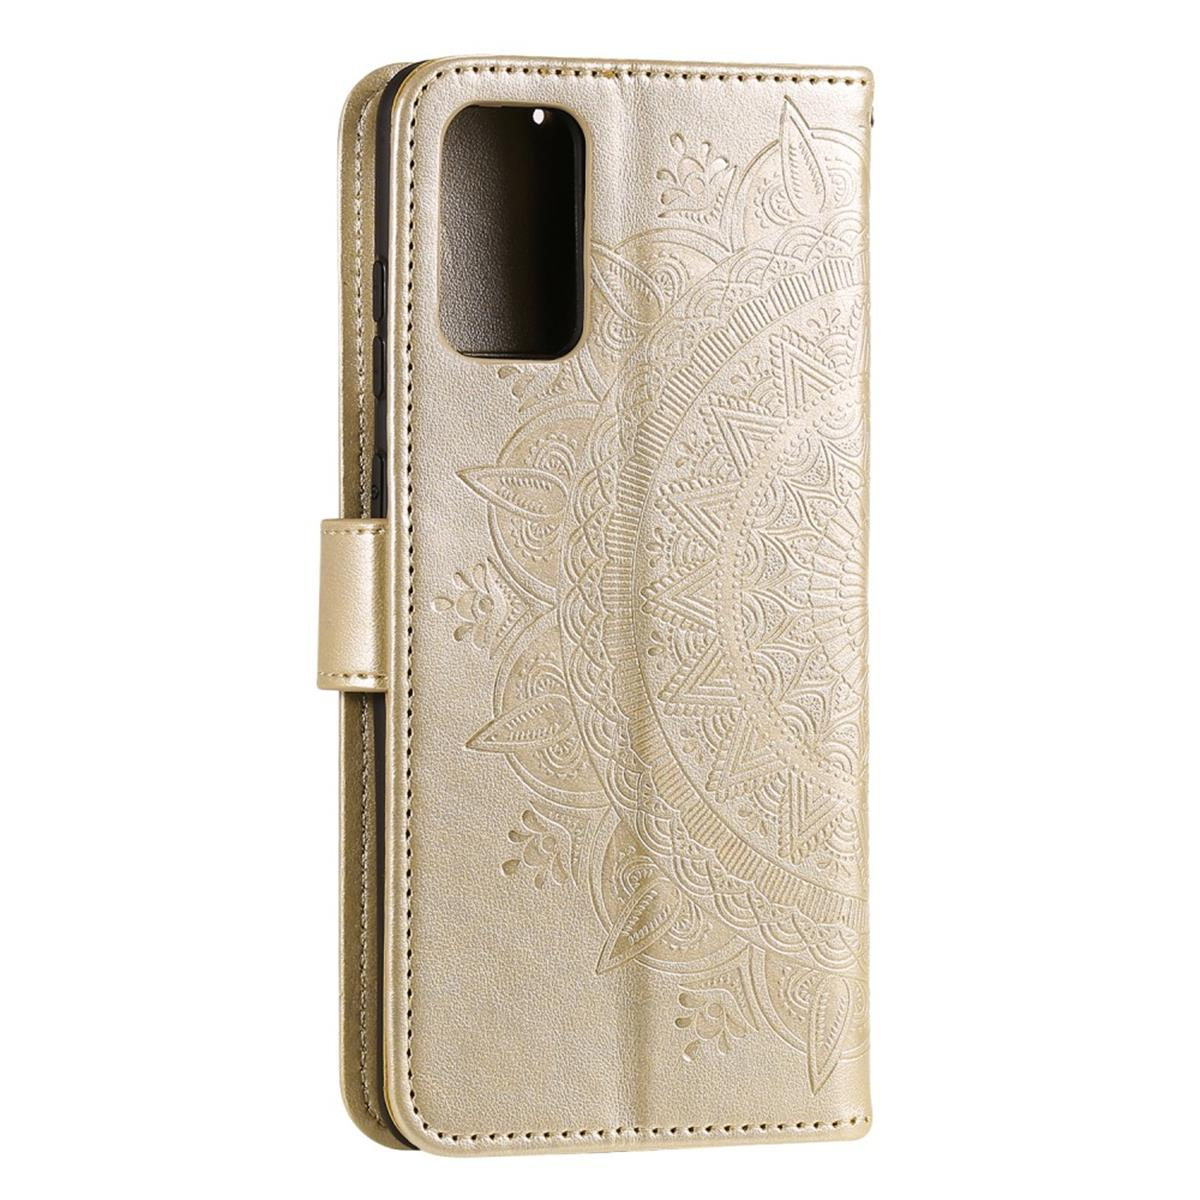 COVERKINGZ Huawei, Gold mit Bookcover, Mandala Y5p, Muster, Klapphülle